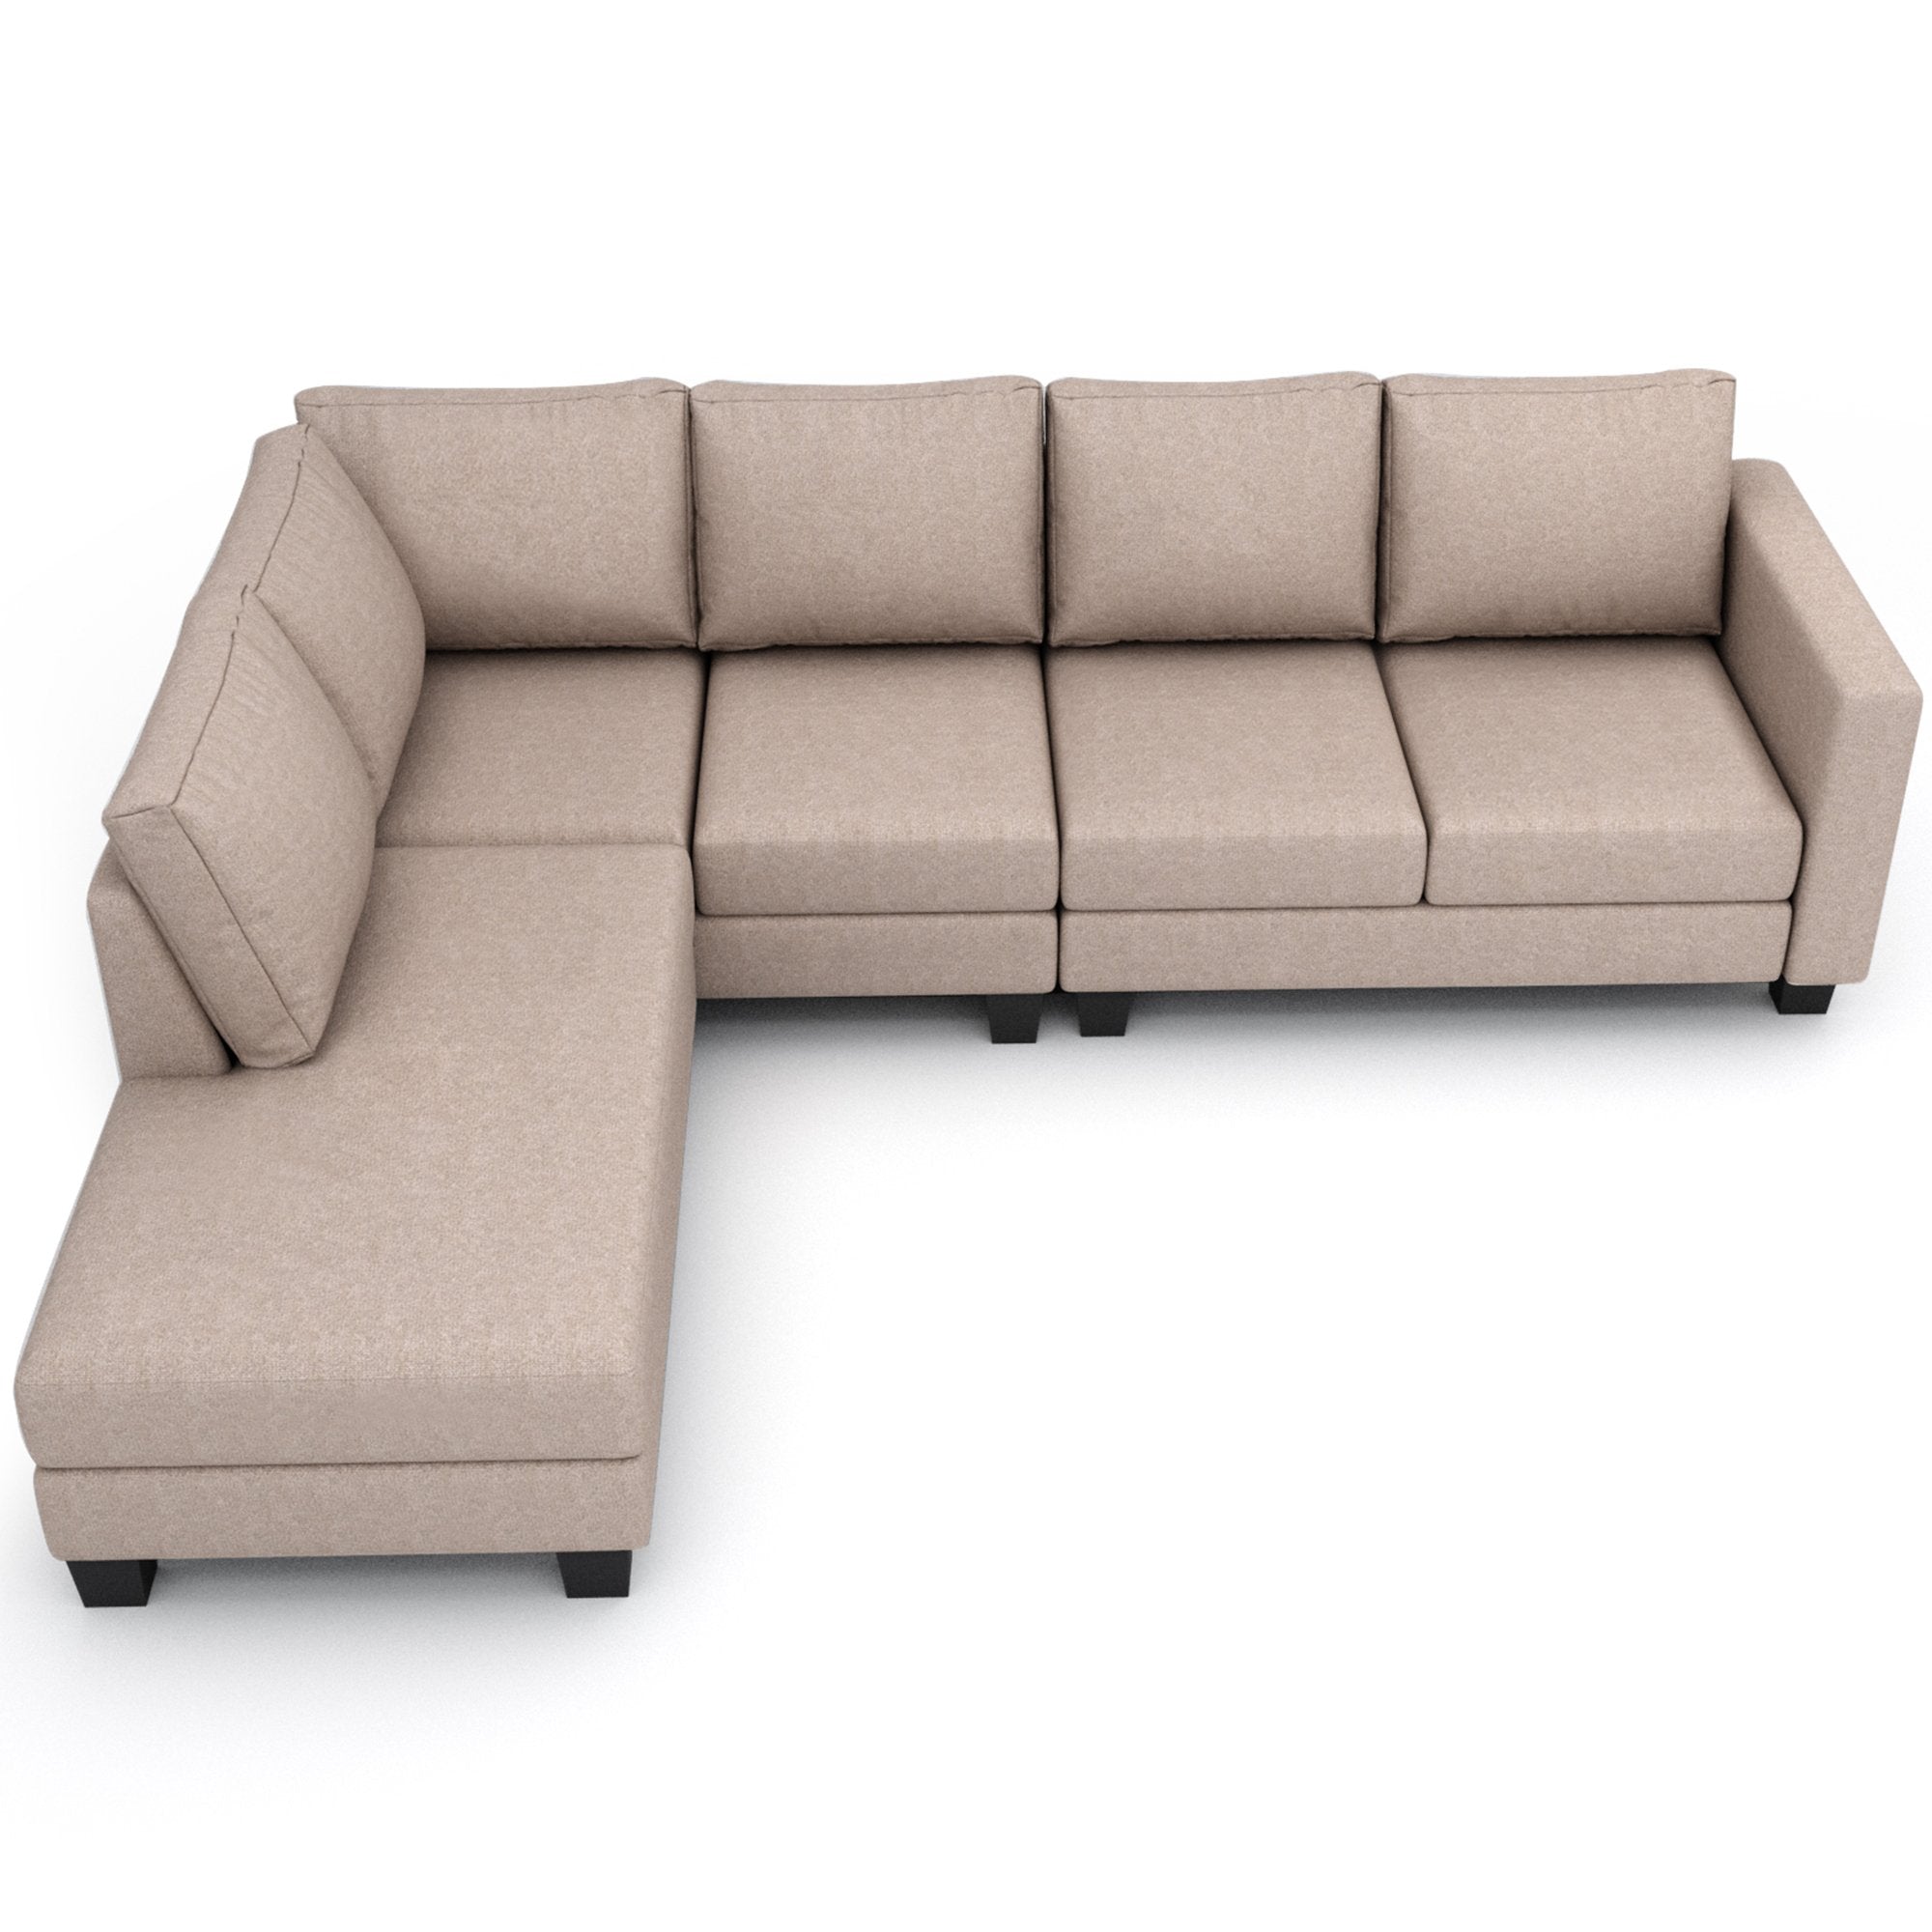 107.25*87"Textured Fabric Sectional Sofa Set, L-shaped Sofa With 5 Seaters for Home Use, Left-arm Facing Chaise, Warm Grey-Boyel Living